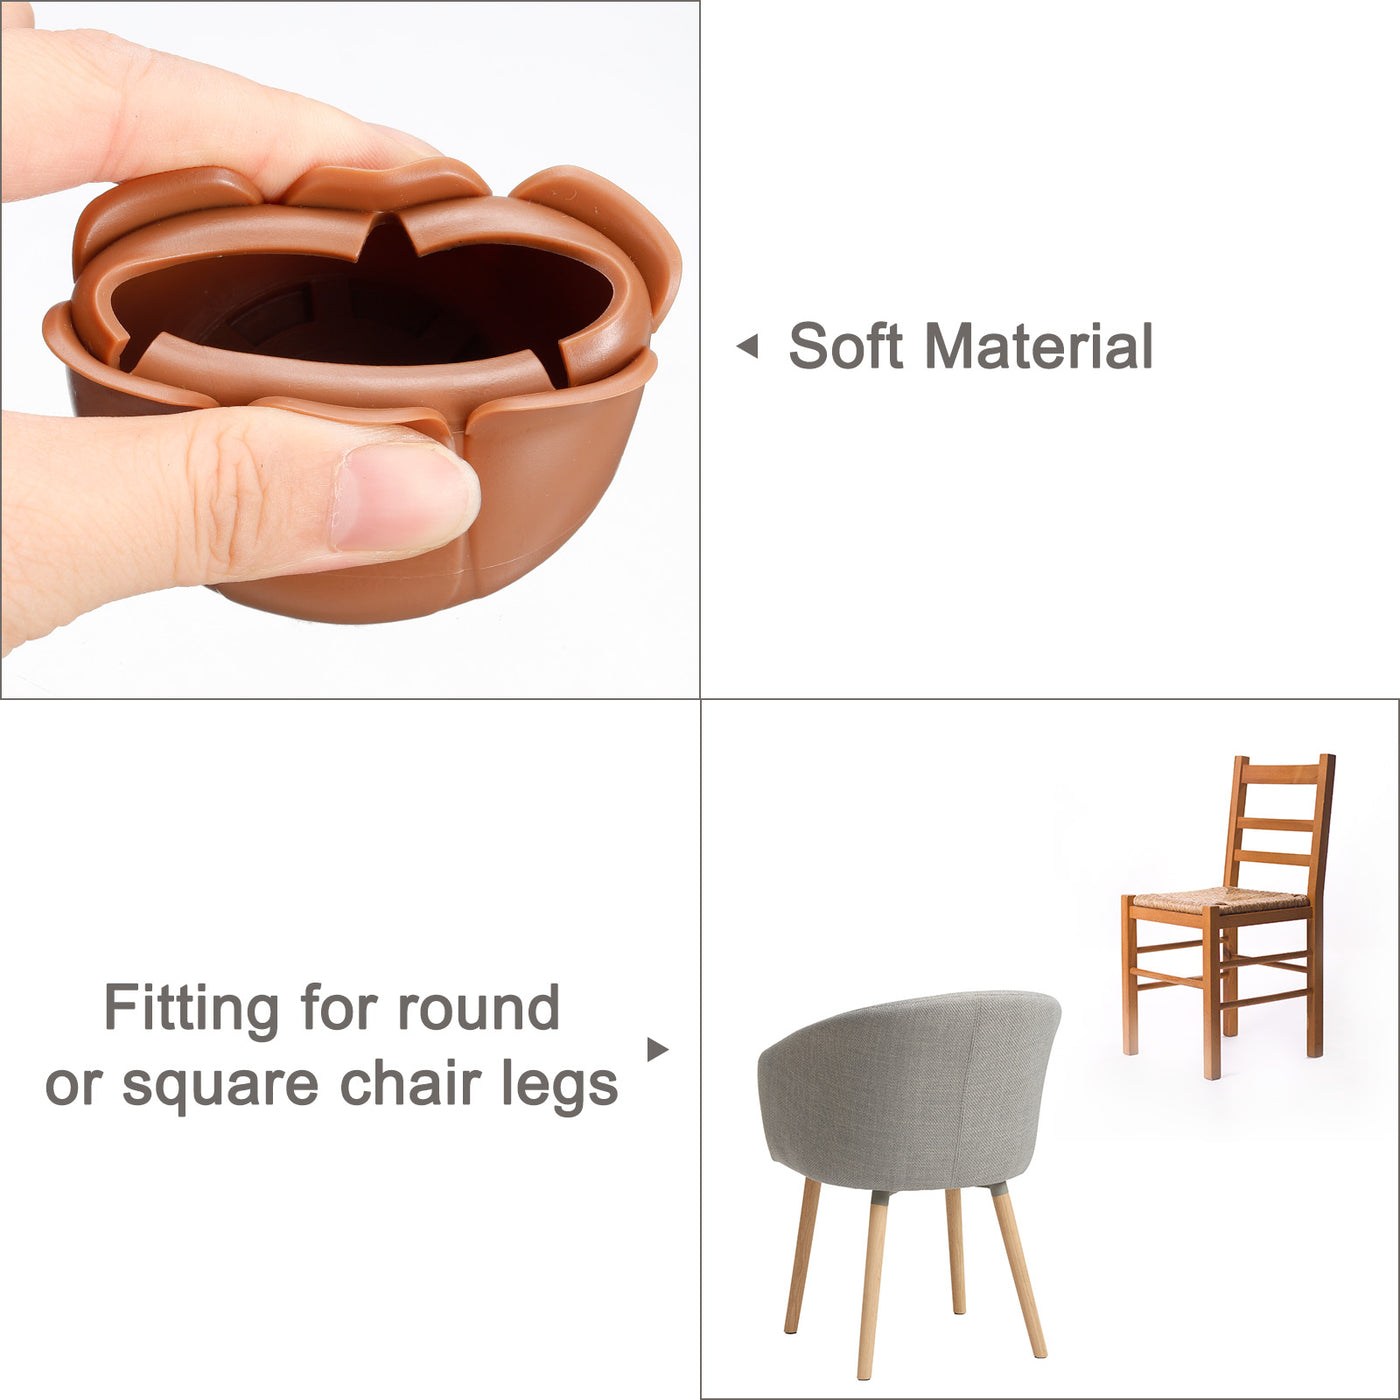 uxcell Uxcell Chair Leg Floor Protectors, 16Pcs 36mm(1.42") Silicone & Felt Chair Leg Cover Caps for Hardwood Floors (Coffee)